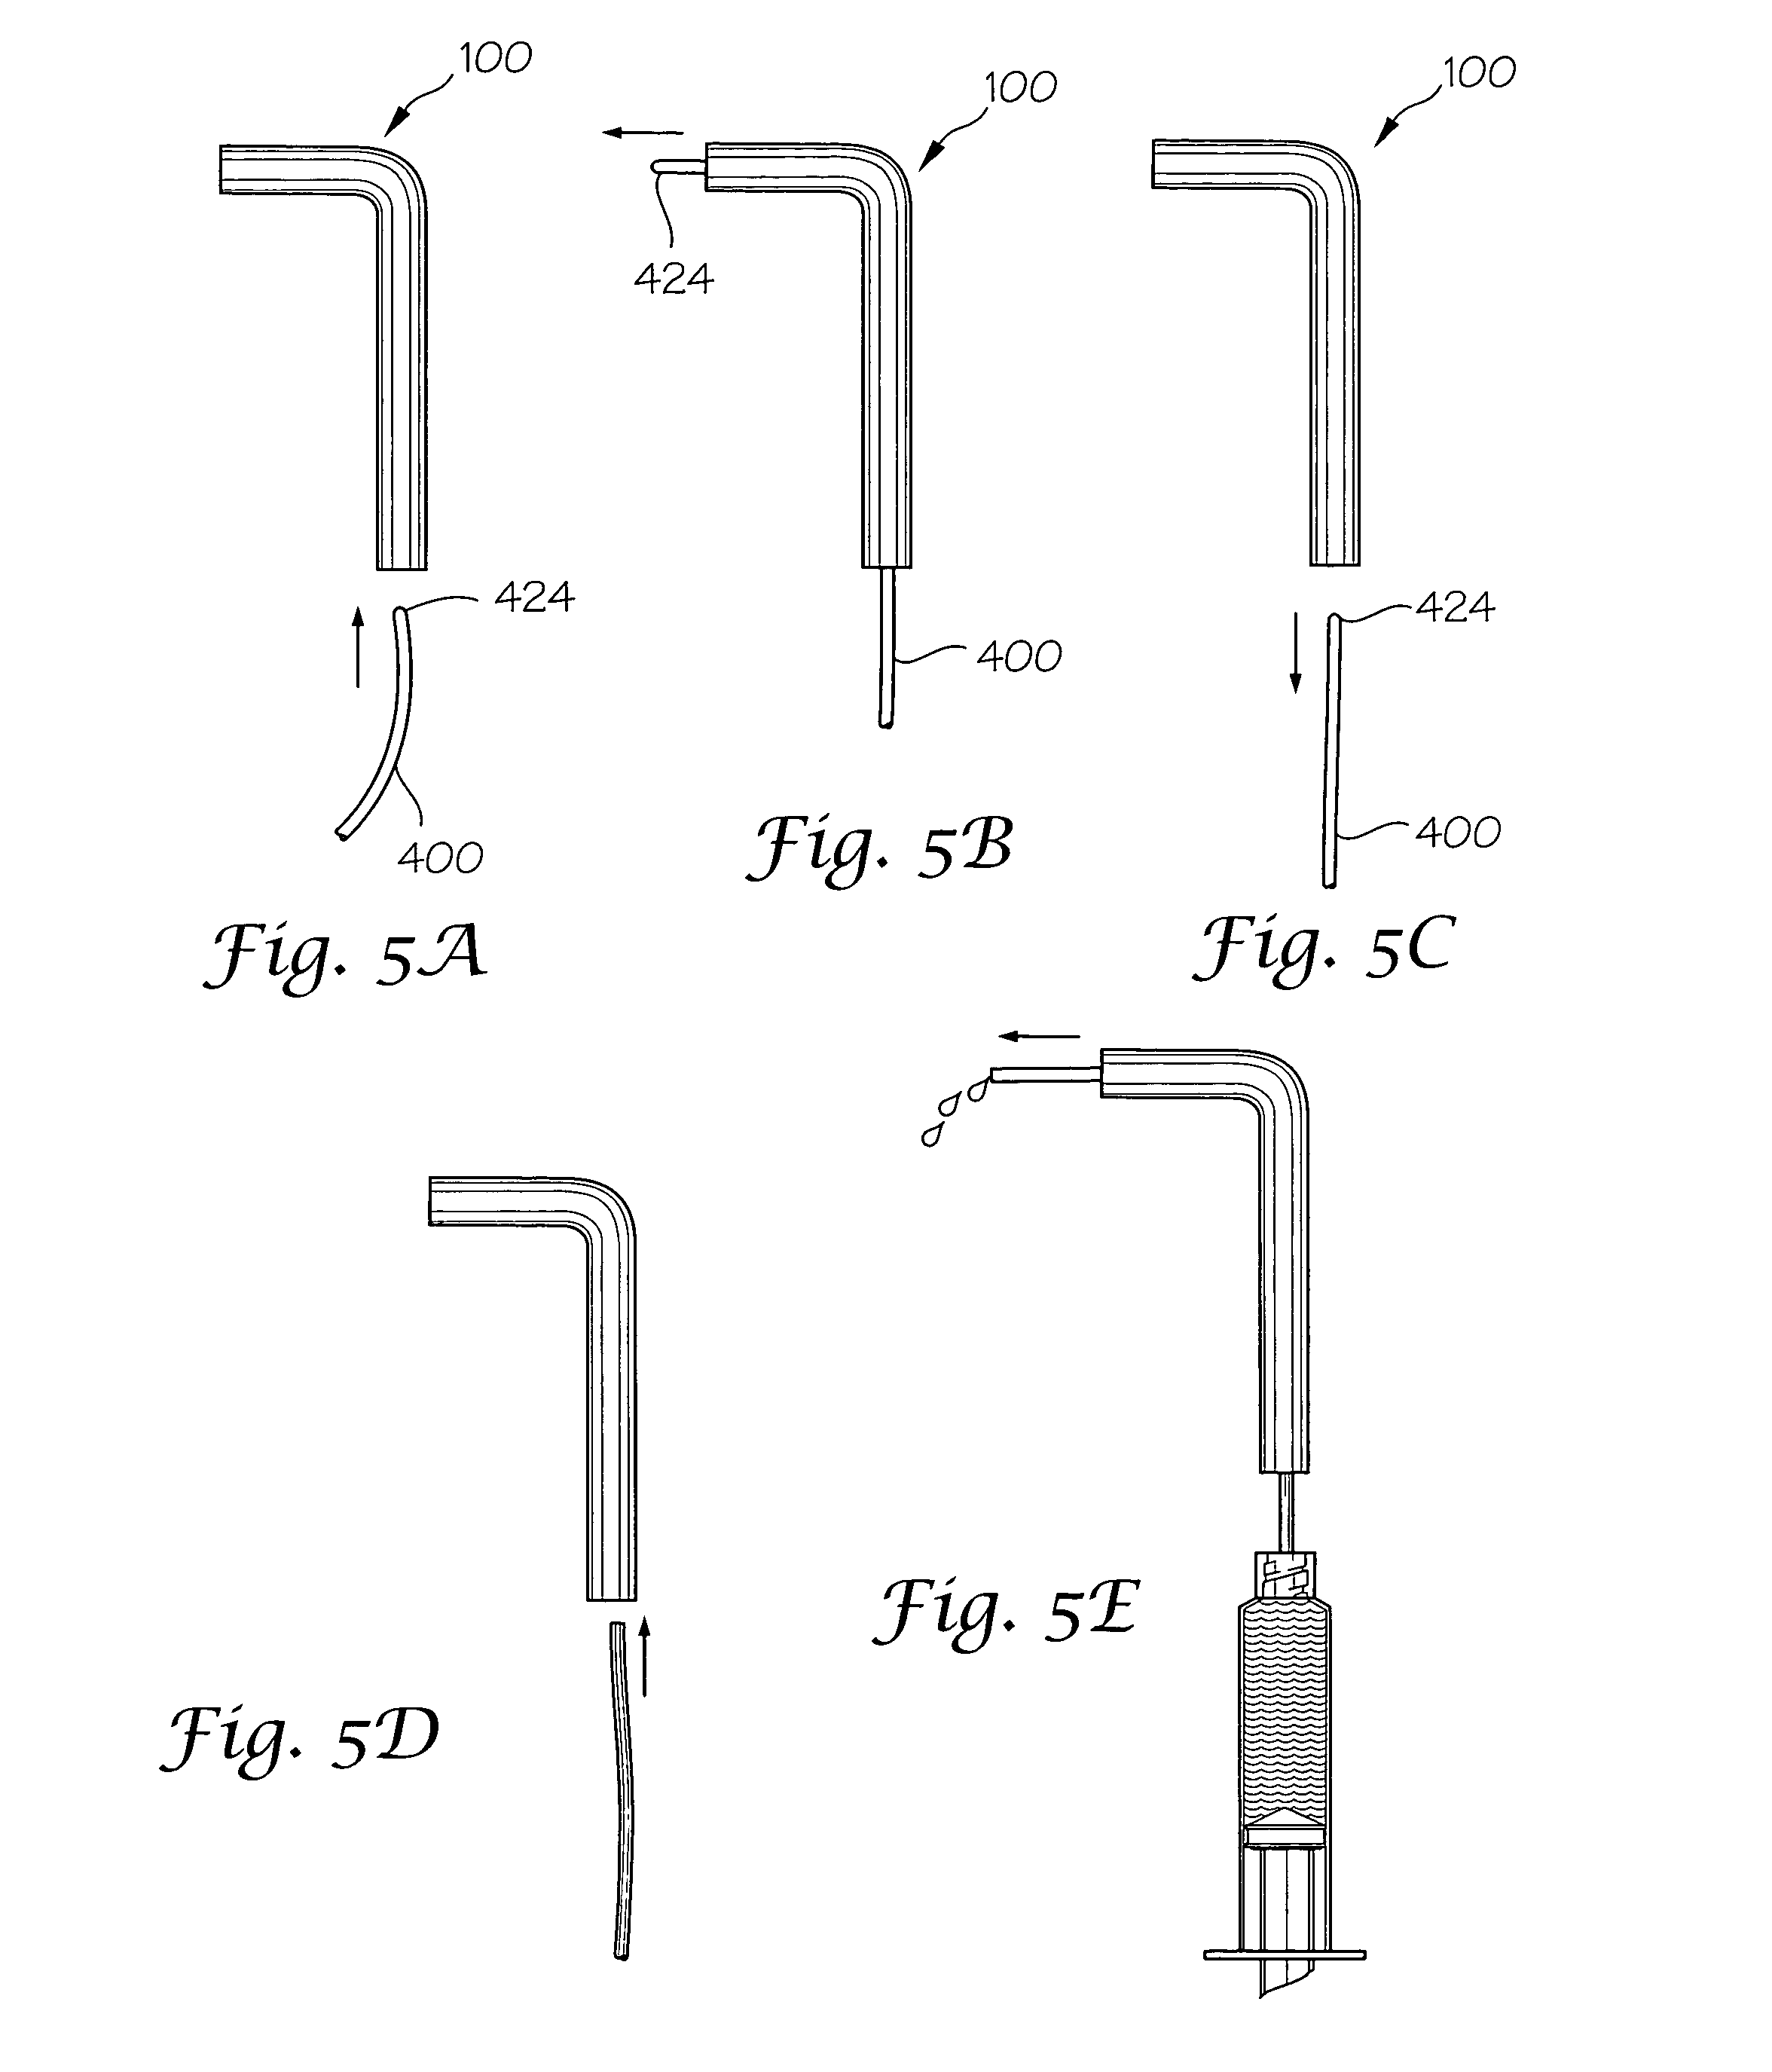 Methods and apparatus for intraoperative administration of analgesia